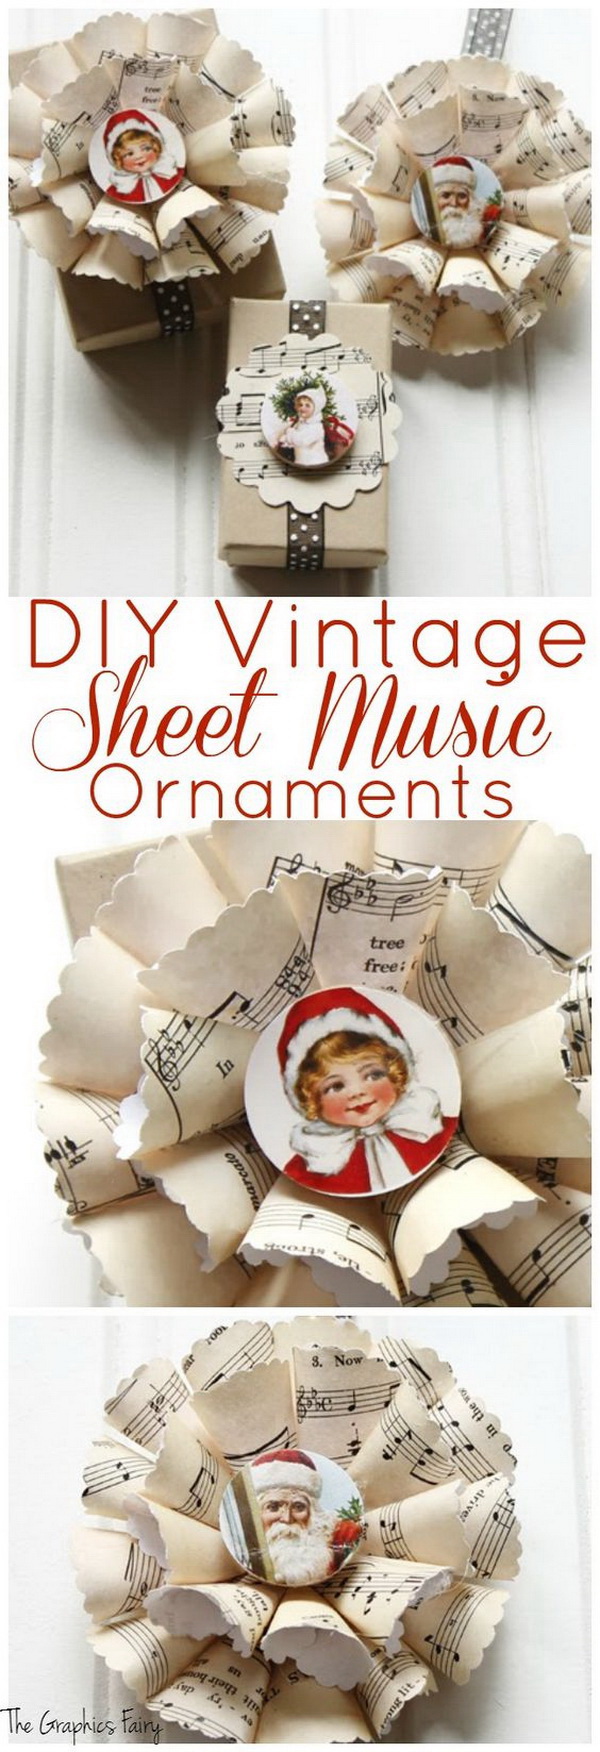 Sheet Music Christmas Ornaments. Great Christmas ornaments made with old sheet music sheets and embellishments! These paper ornaments would be great on the top of a gift as decoration!